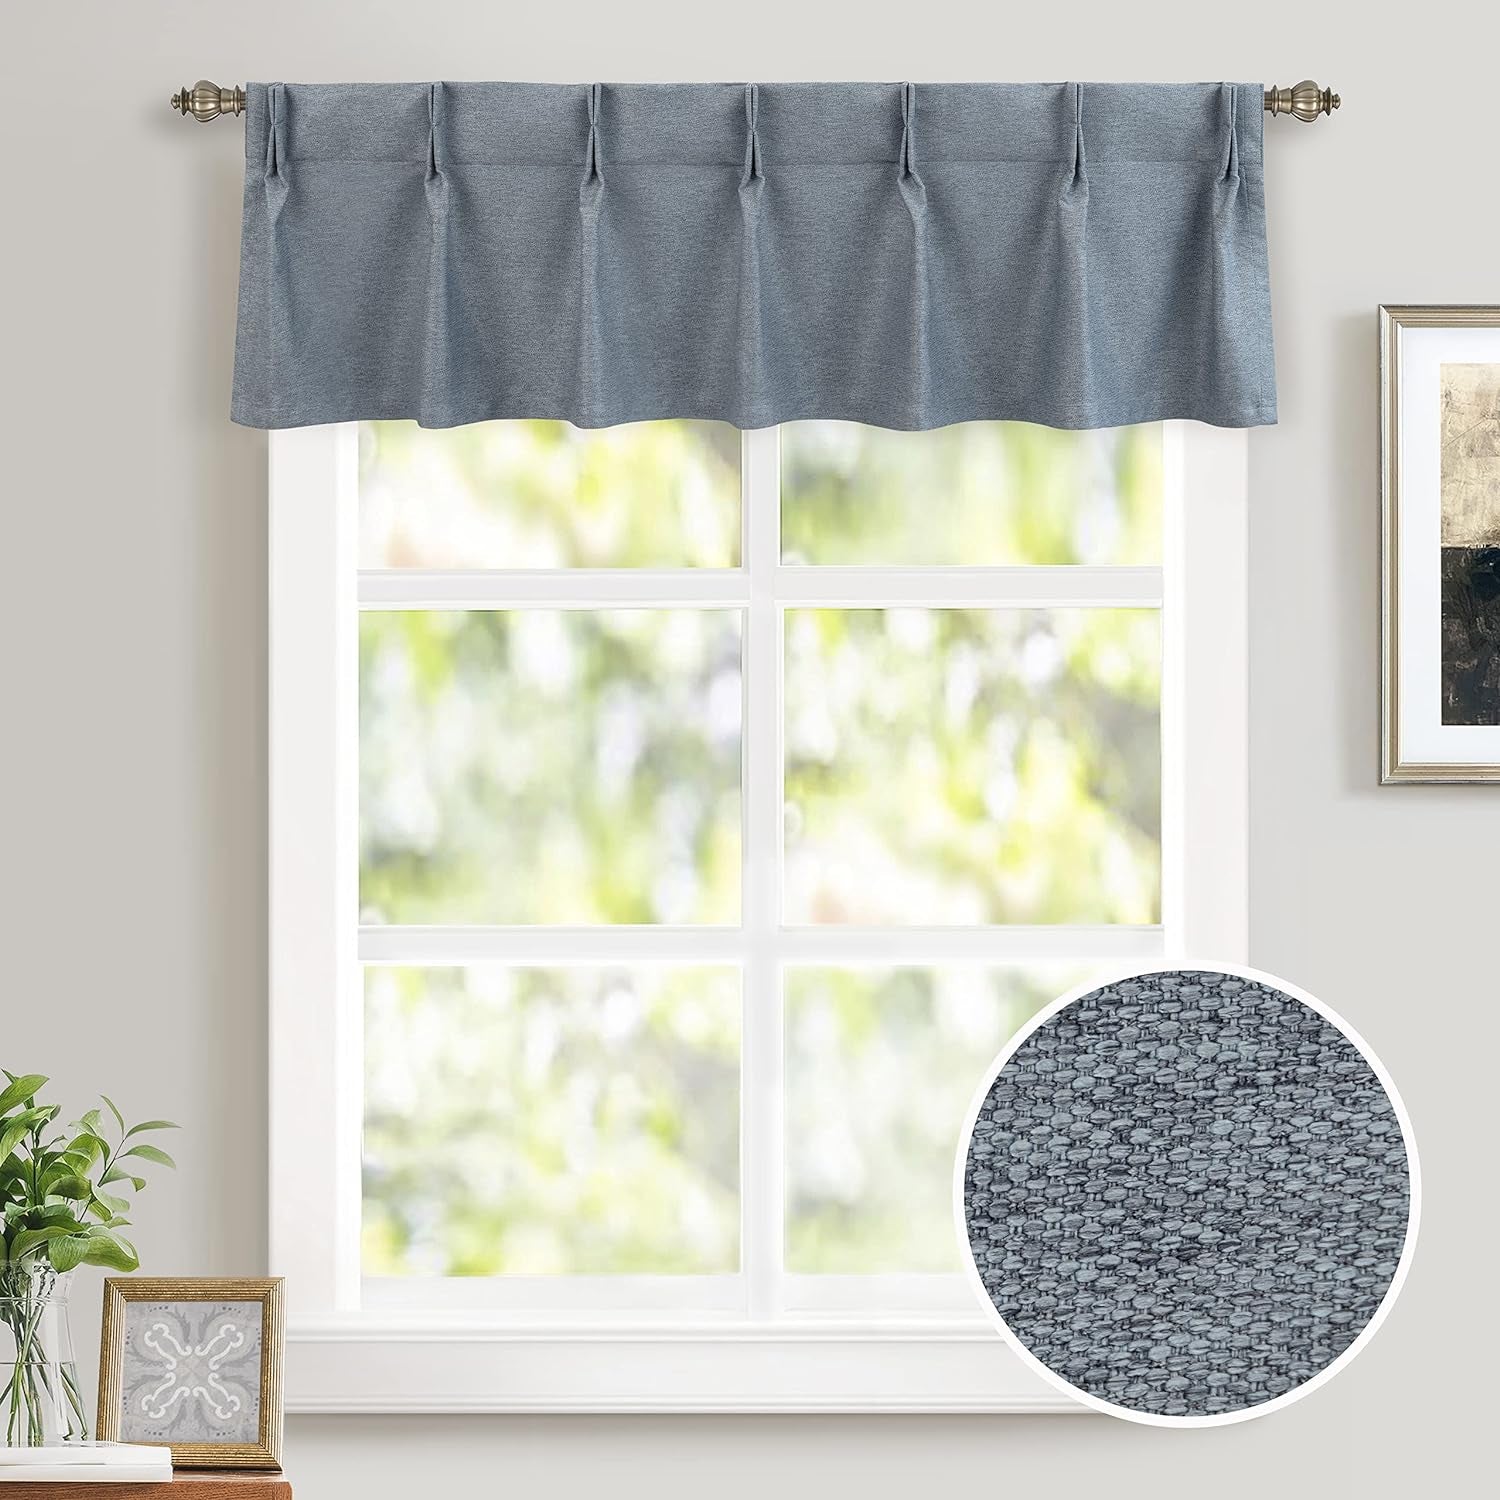 Driftaway Pinch Pleat Valance for Kitchen Window Blackout Faux Linen Textured Solid Valance for Living Room 16 Inch Farmhouse Linen Curtain Valance Window Treatment Back Tab 52X16 Dusty Blue